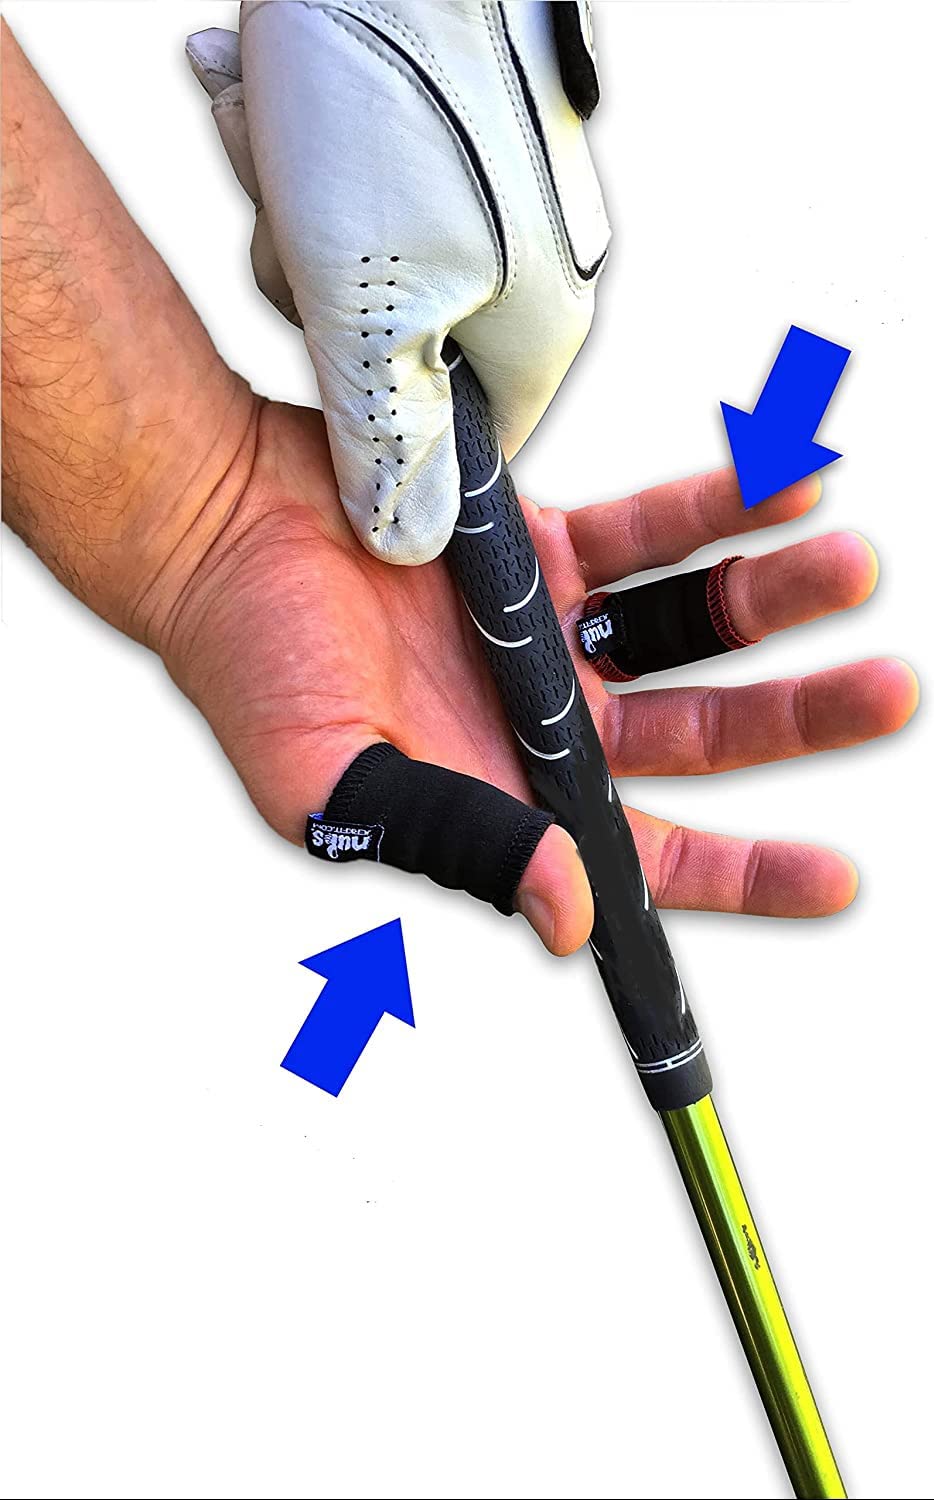 JerkFit NUBS, Finger Caddies - Thumb and Finger Sleeves to Prevent Golf blisters. (Pair)